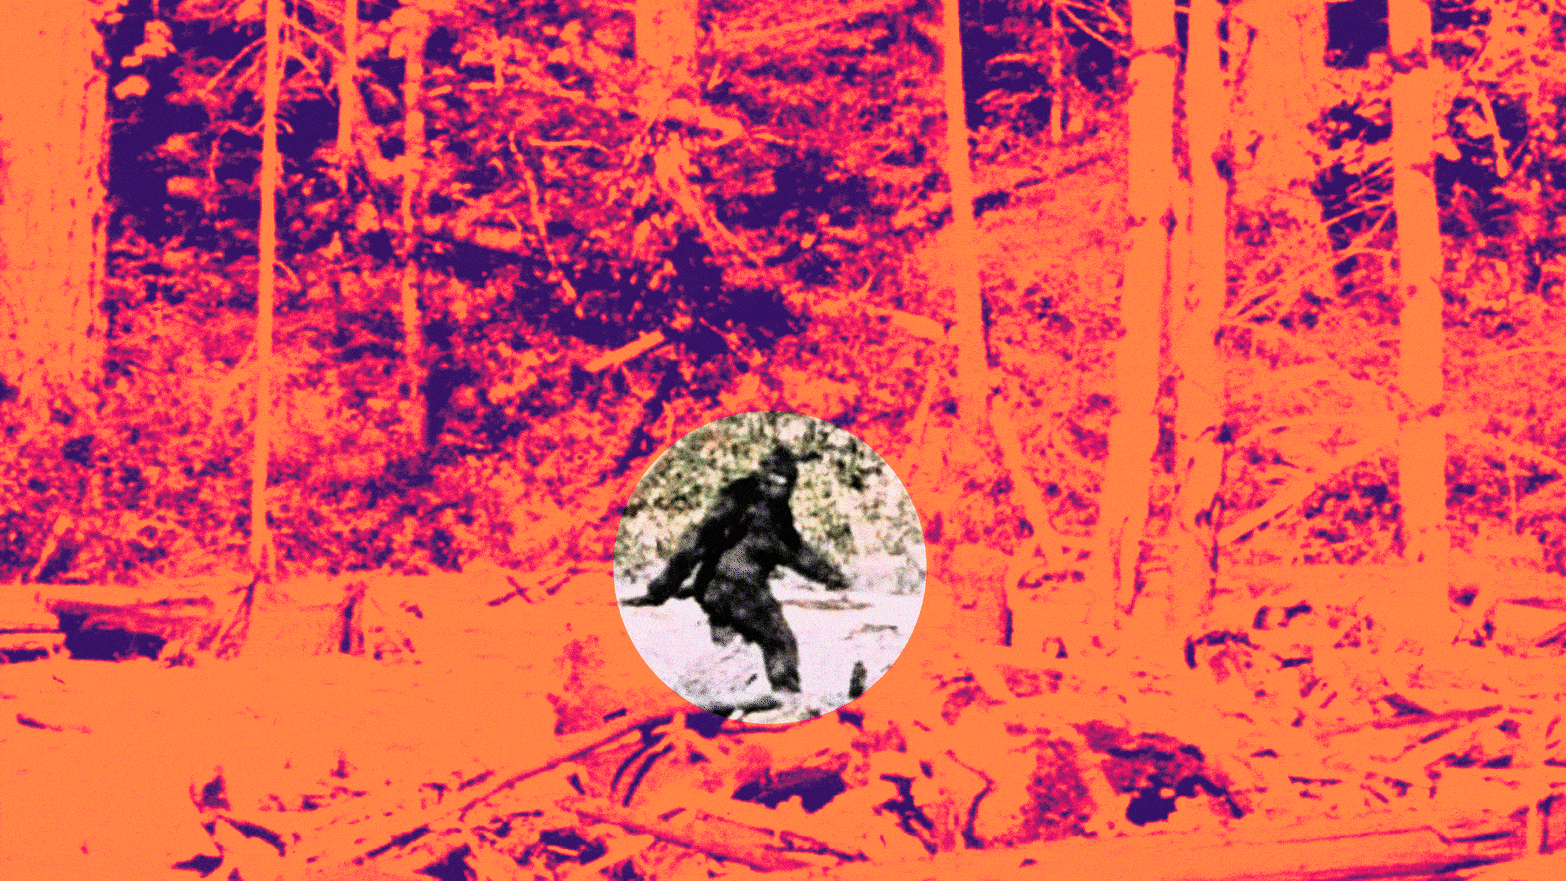 "A gif showing a thermal heat map illustration of Frame 352 from the Patterson Gimlin Bigfoot film from 1967, with a searching spotlight for Bigfoot."